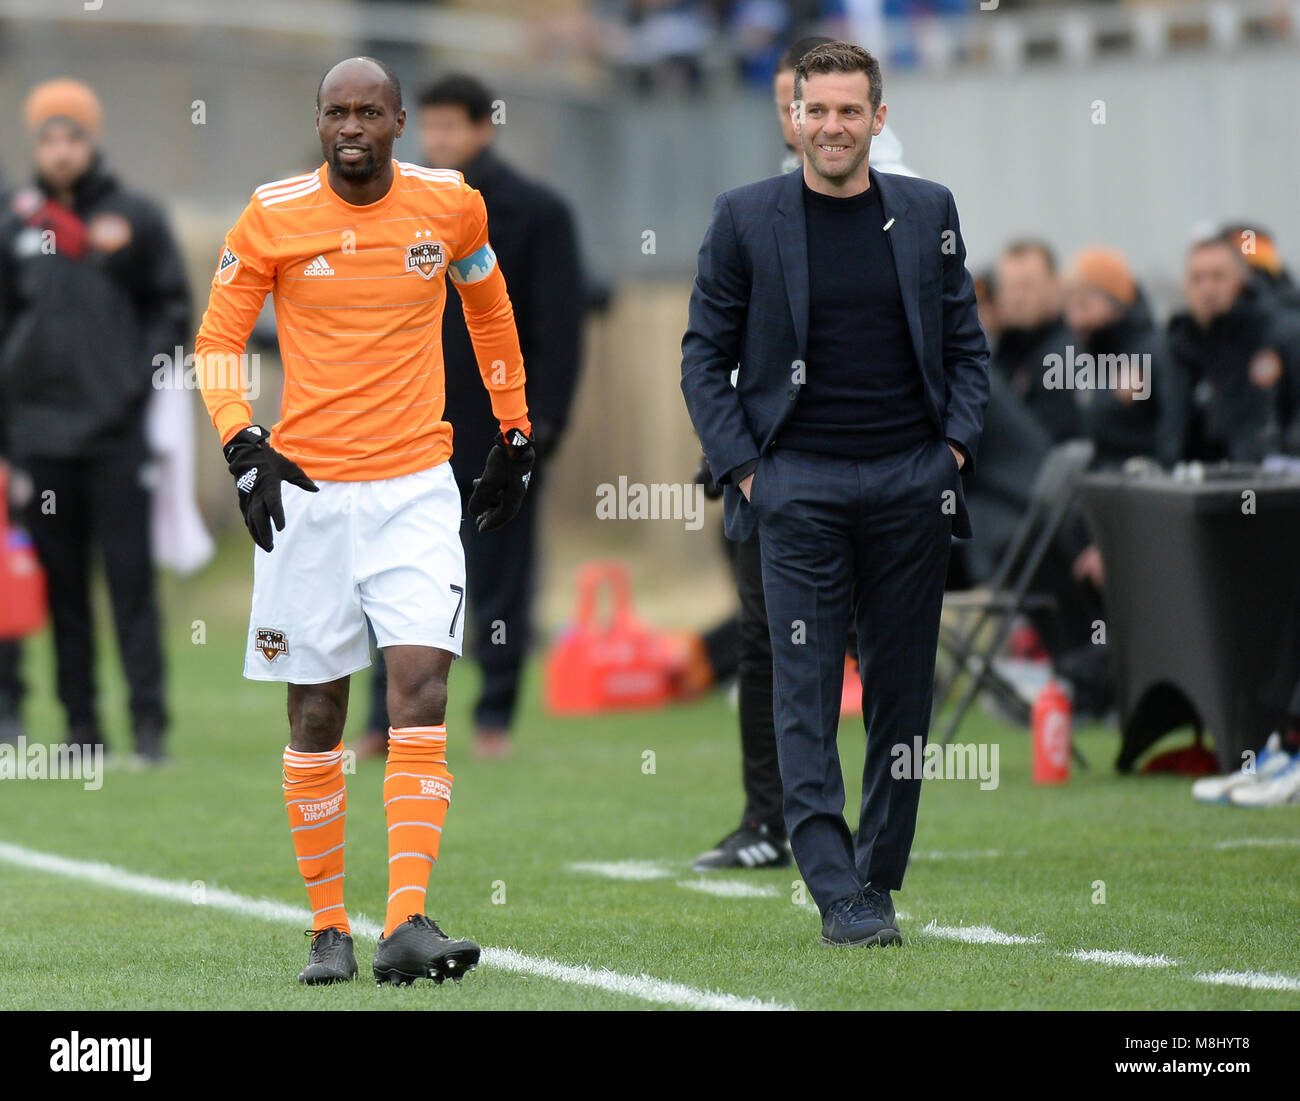 Washington, DC, USA. 17th Mar, 2018. 20180317 - D.C. United coach BEN OLSEN smiles as Houston Dynamo defender DAMARCUS BEASLEY (7) walks off an injury in the first half at the Maryland SoccerPlex in Boyds, Md. Credit: Chuck Myers/ZUMA Wire/Alamy Live News Stock Photo